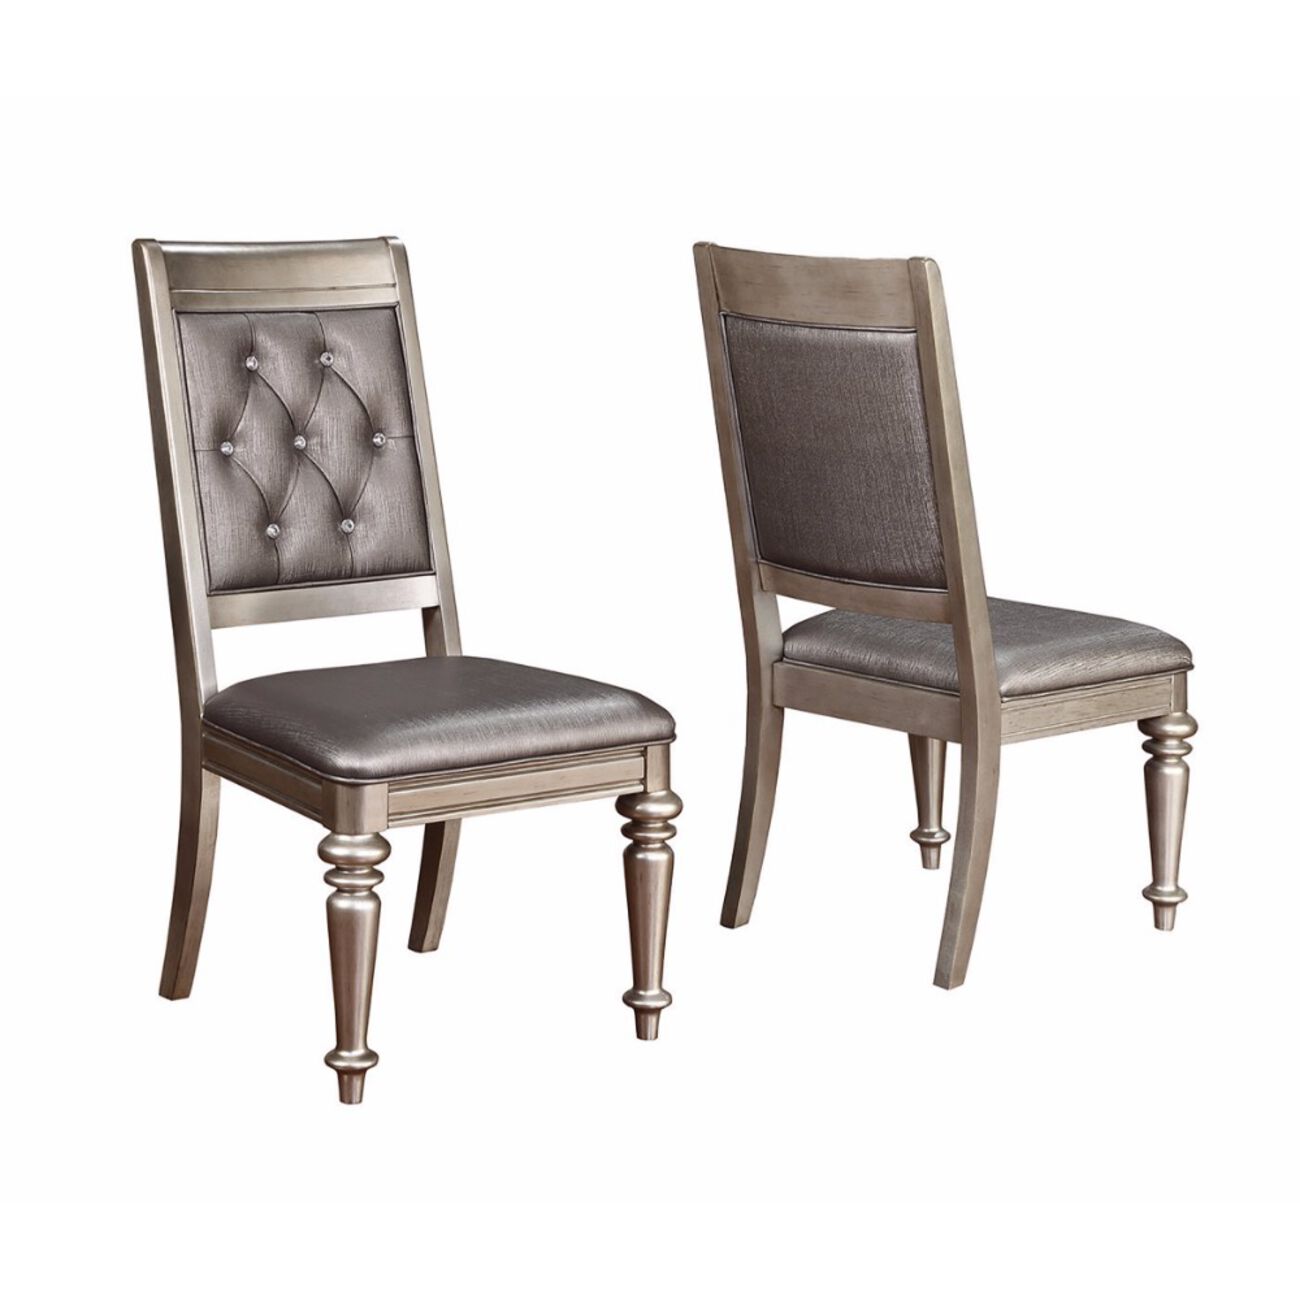 Wooden Dining Armless Chair With Tufted Back, Gray & Silver, Set of 2